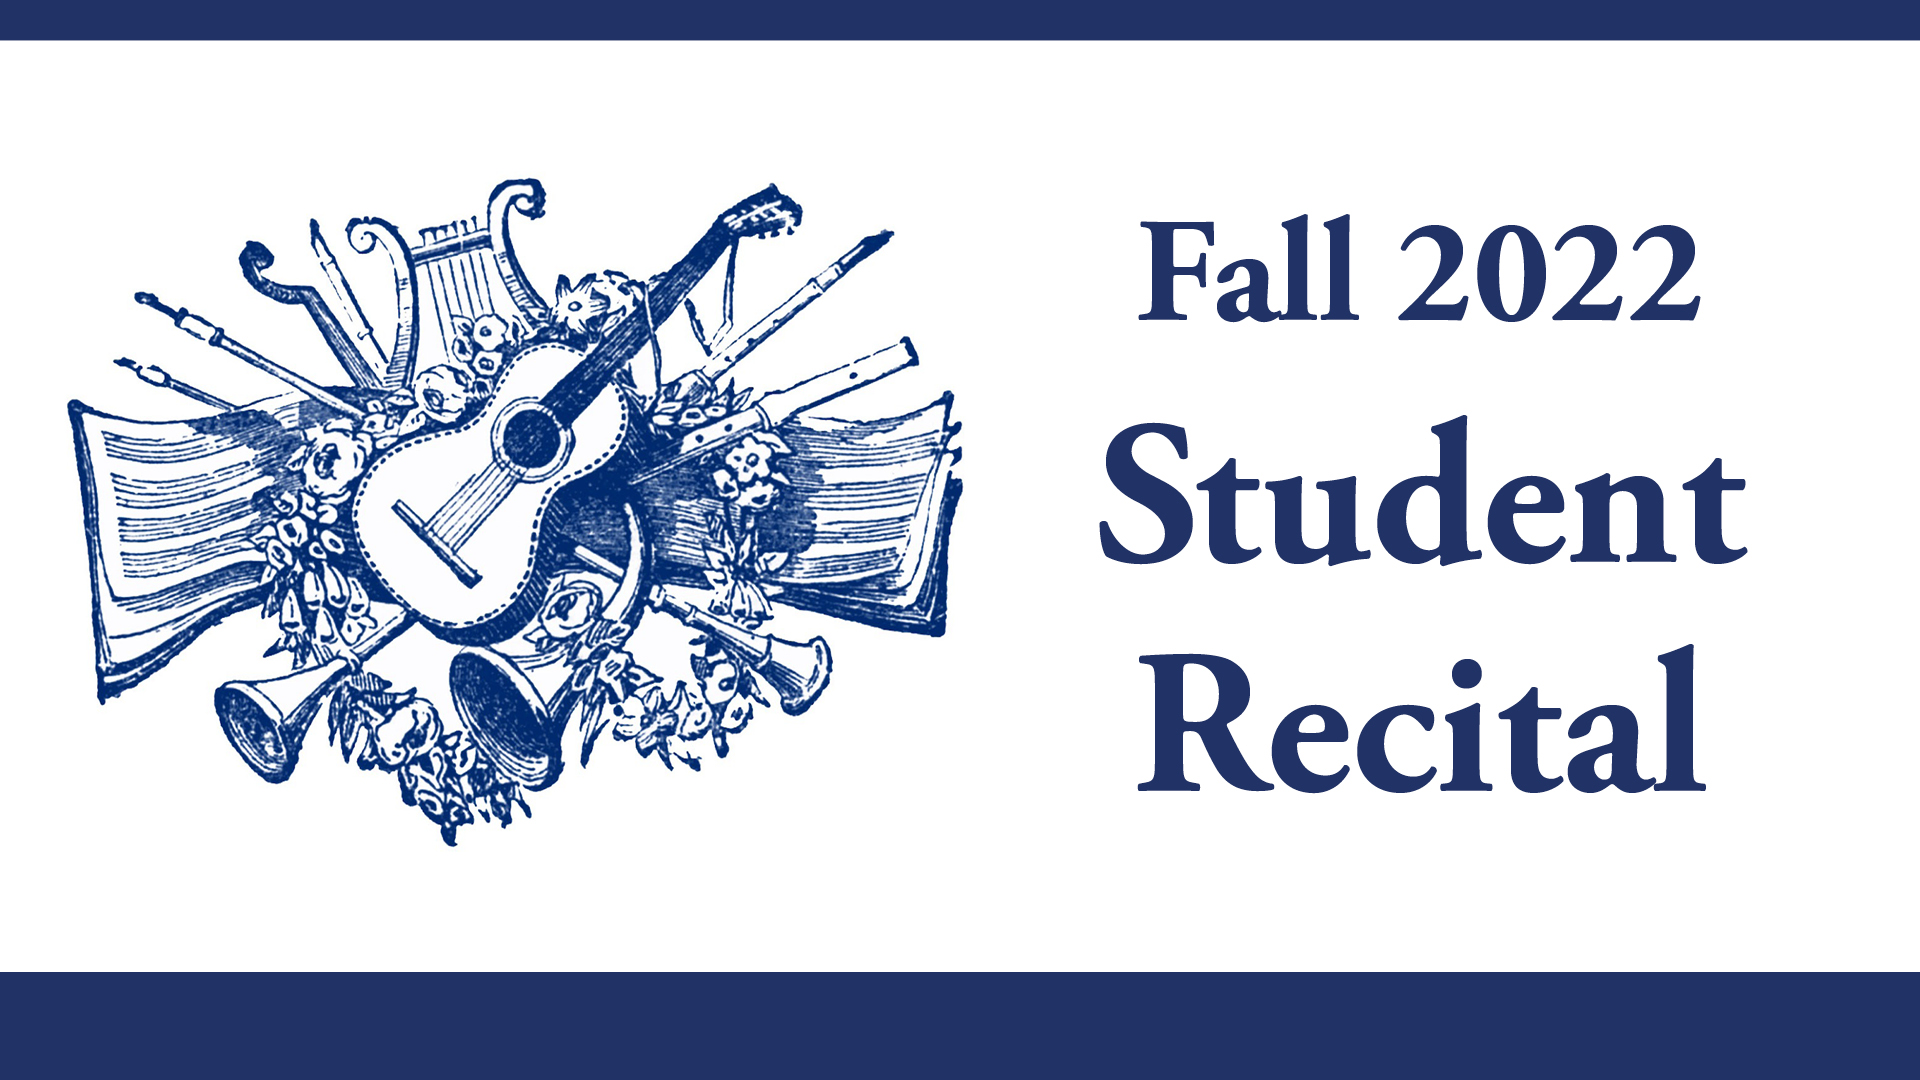 white background with blue instraments and text, fall 2022 student recital, December 7 at 5:30 and 7pm